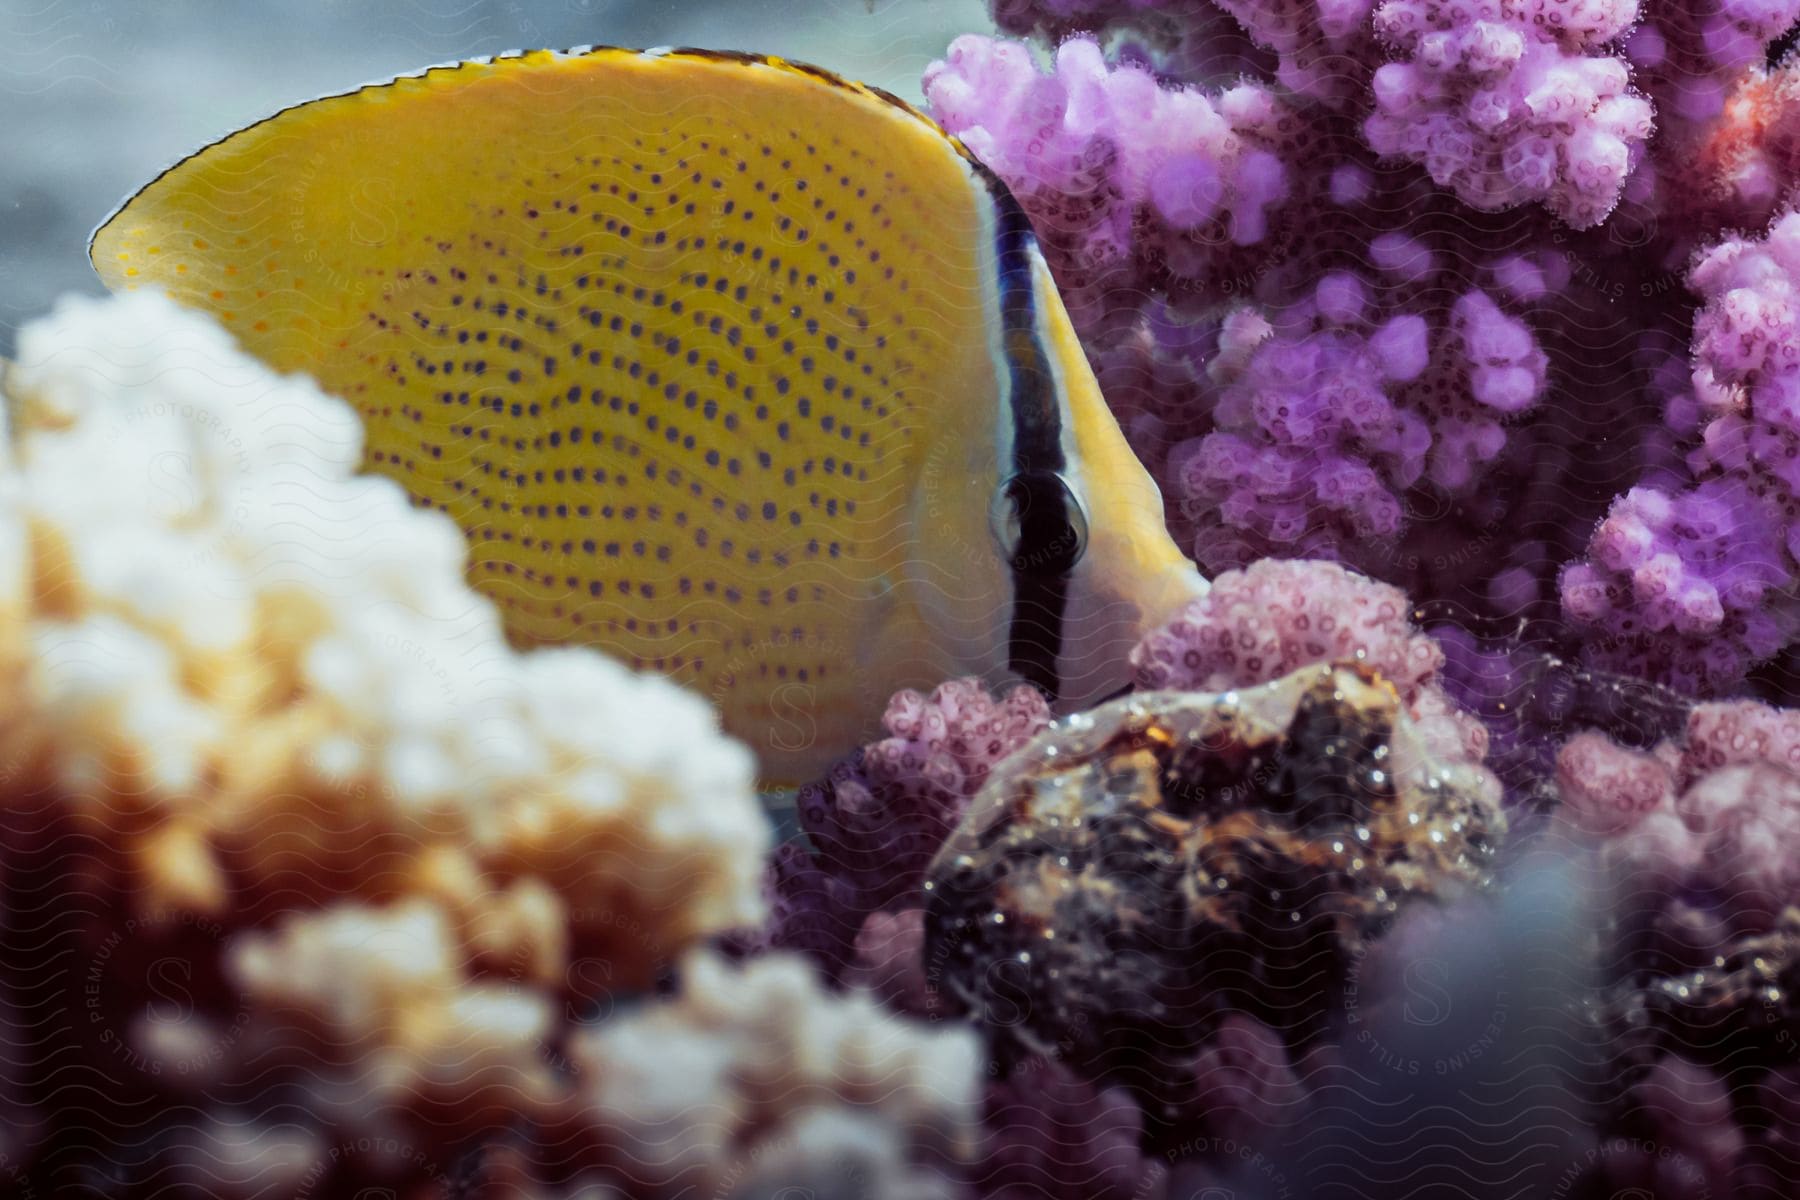 A colorful underwater scene with various fish and coral in a coral reef